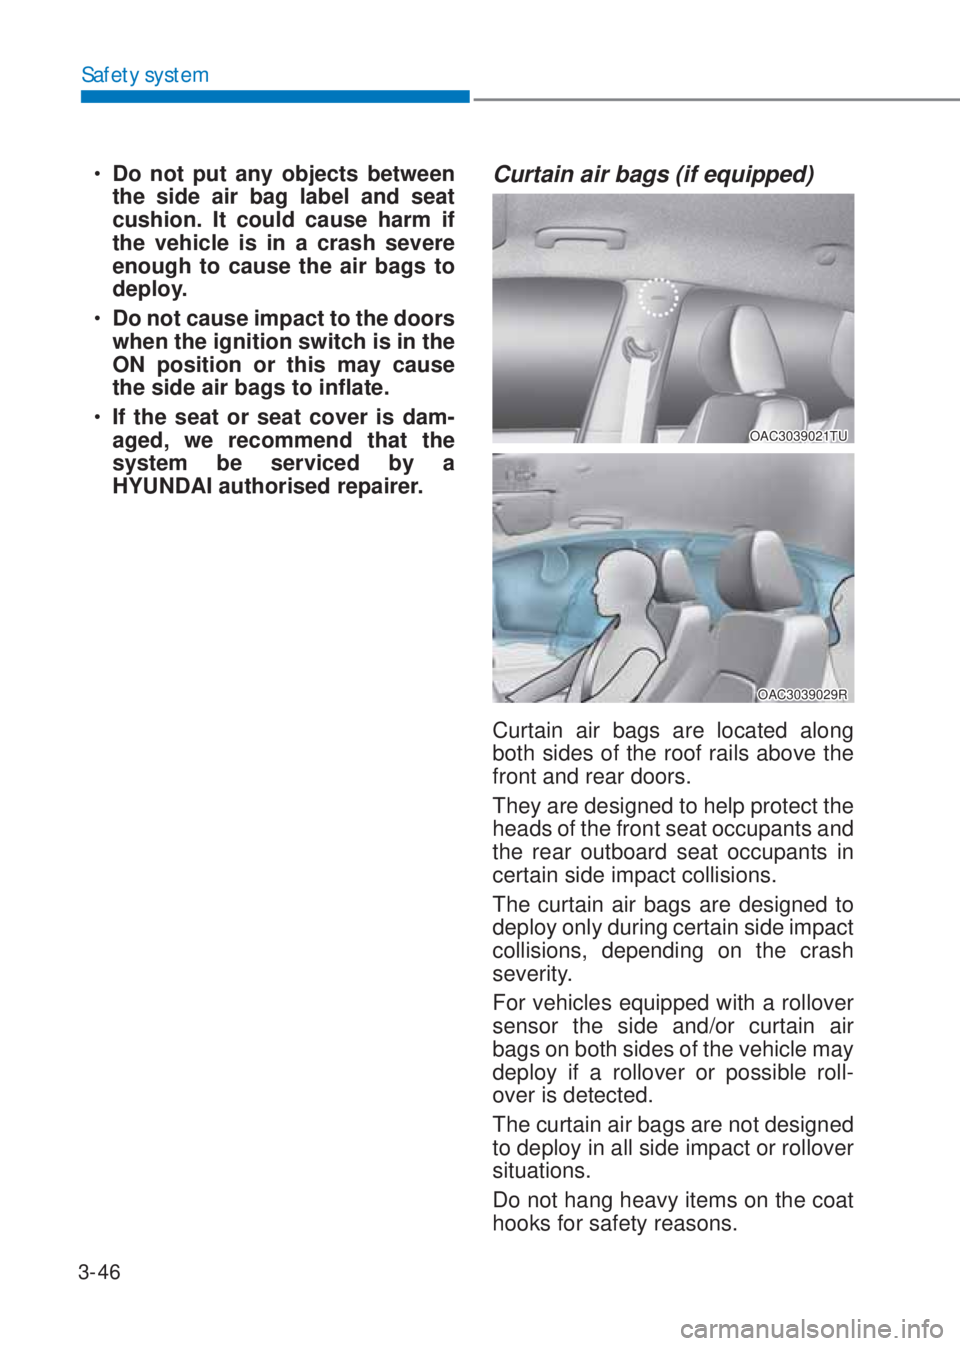 HYUNDAI I10 2023  Owners Manual 3-46
Safety system
�‡�Do not put any objects between 
the side air bag label and seat 
cushion. It could cause harm if 
the vehicle is in a crash severe 
enough to cause the air bags to 
deploy.
��